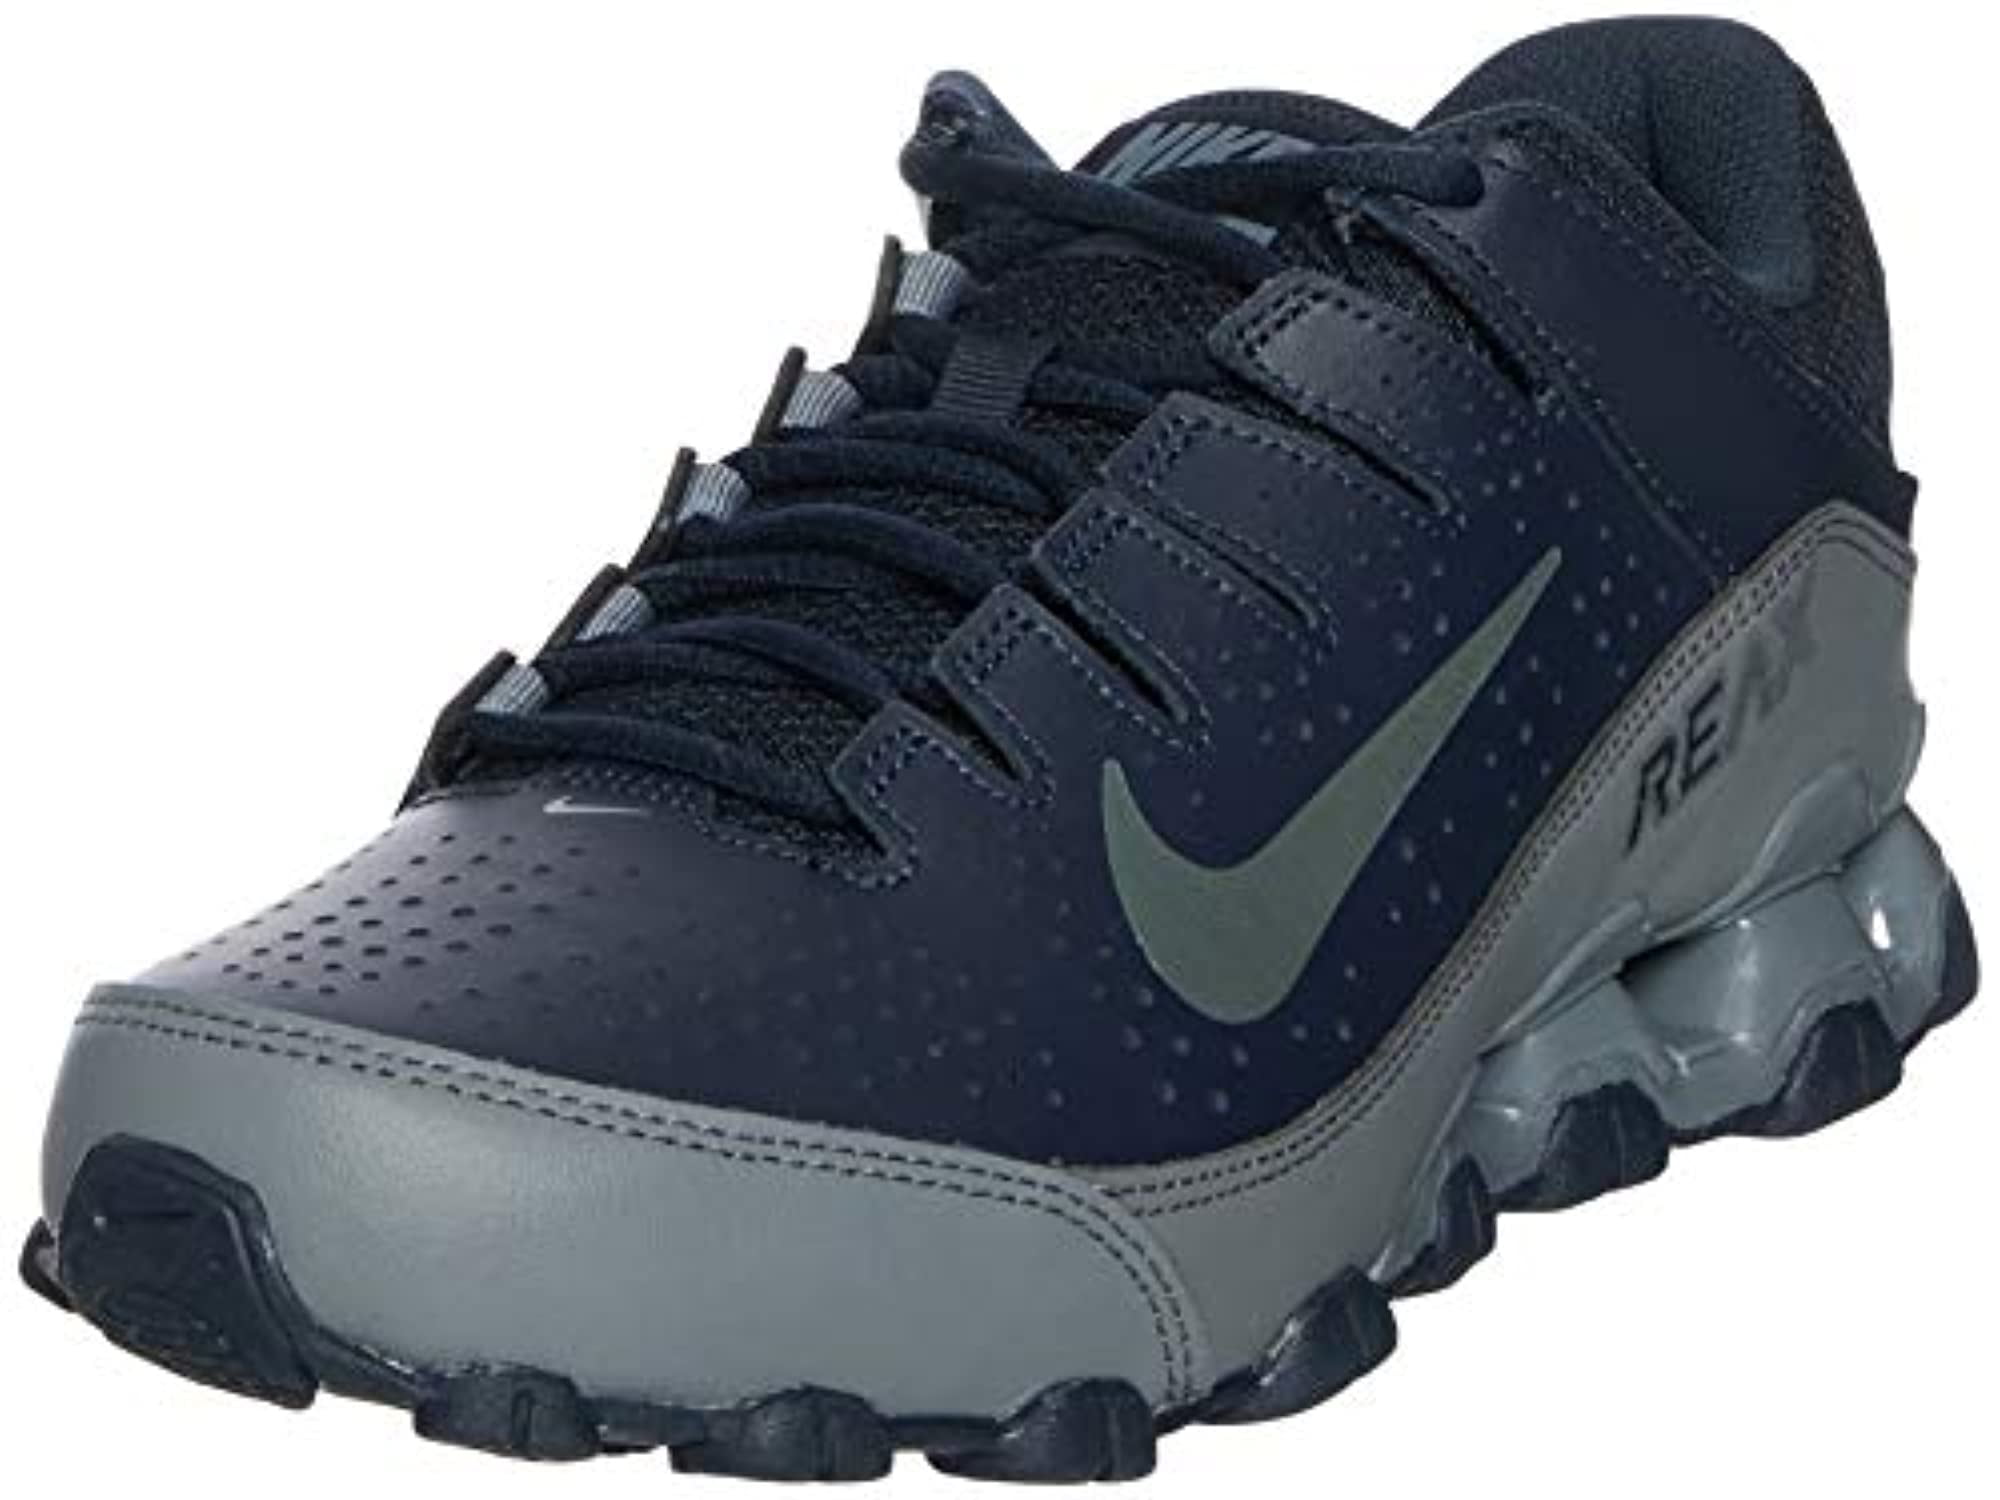 Cross-Trainers Athletic Sneakers Shoes 